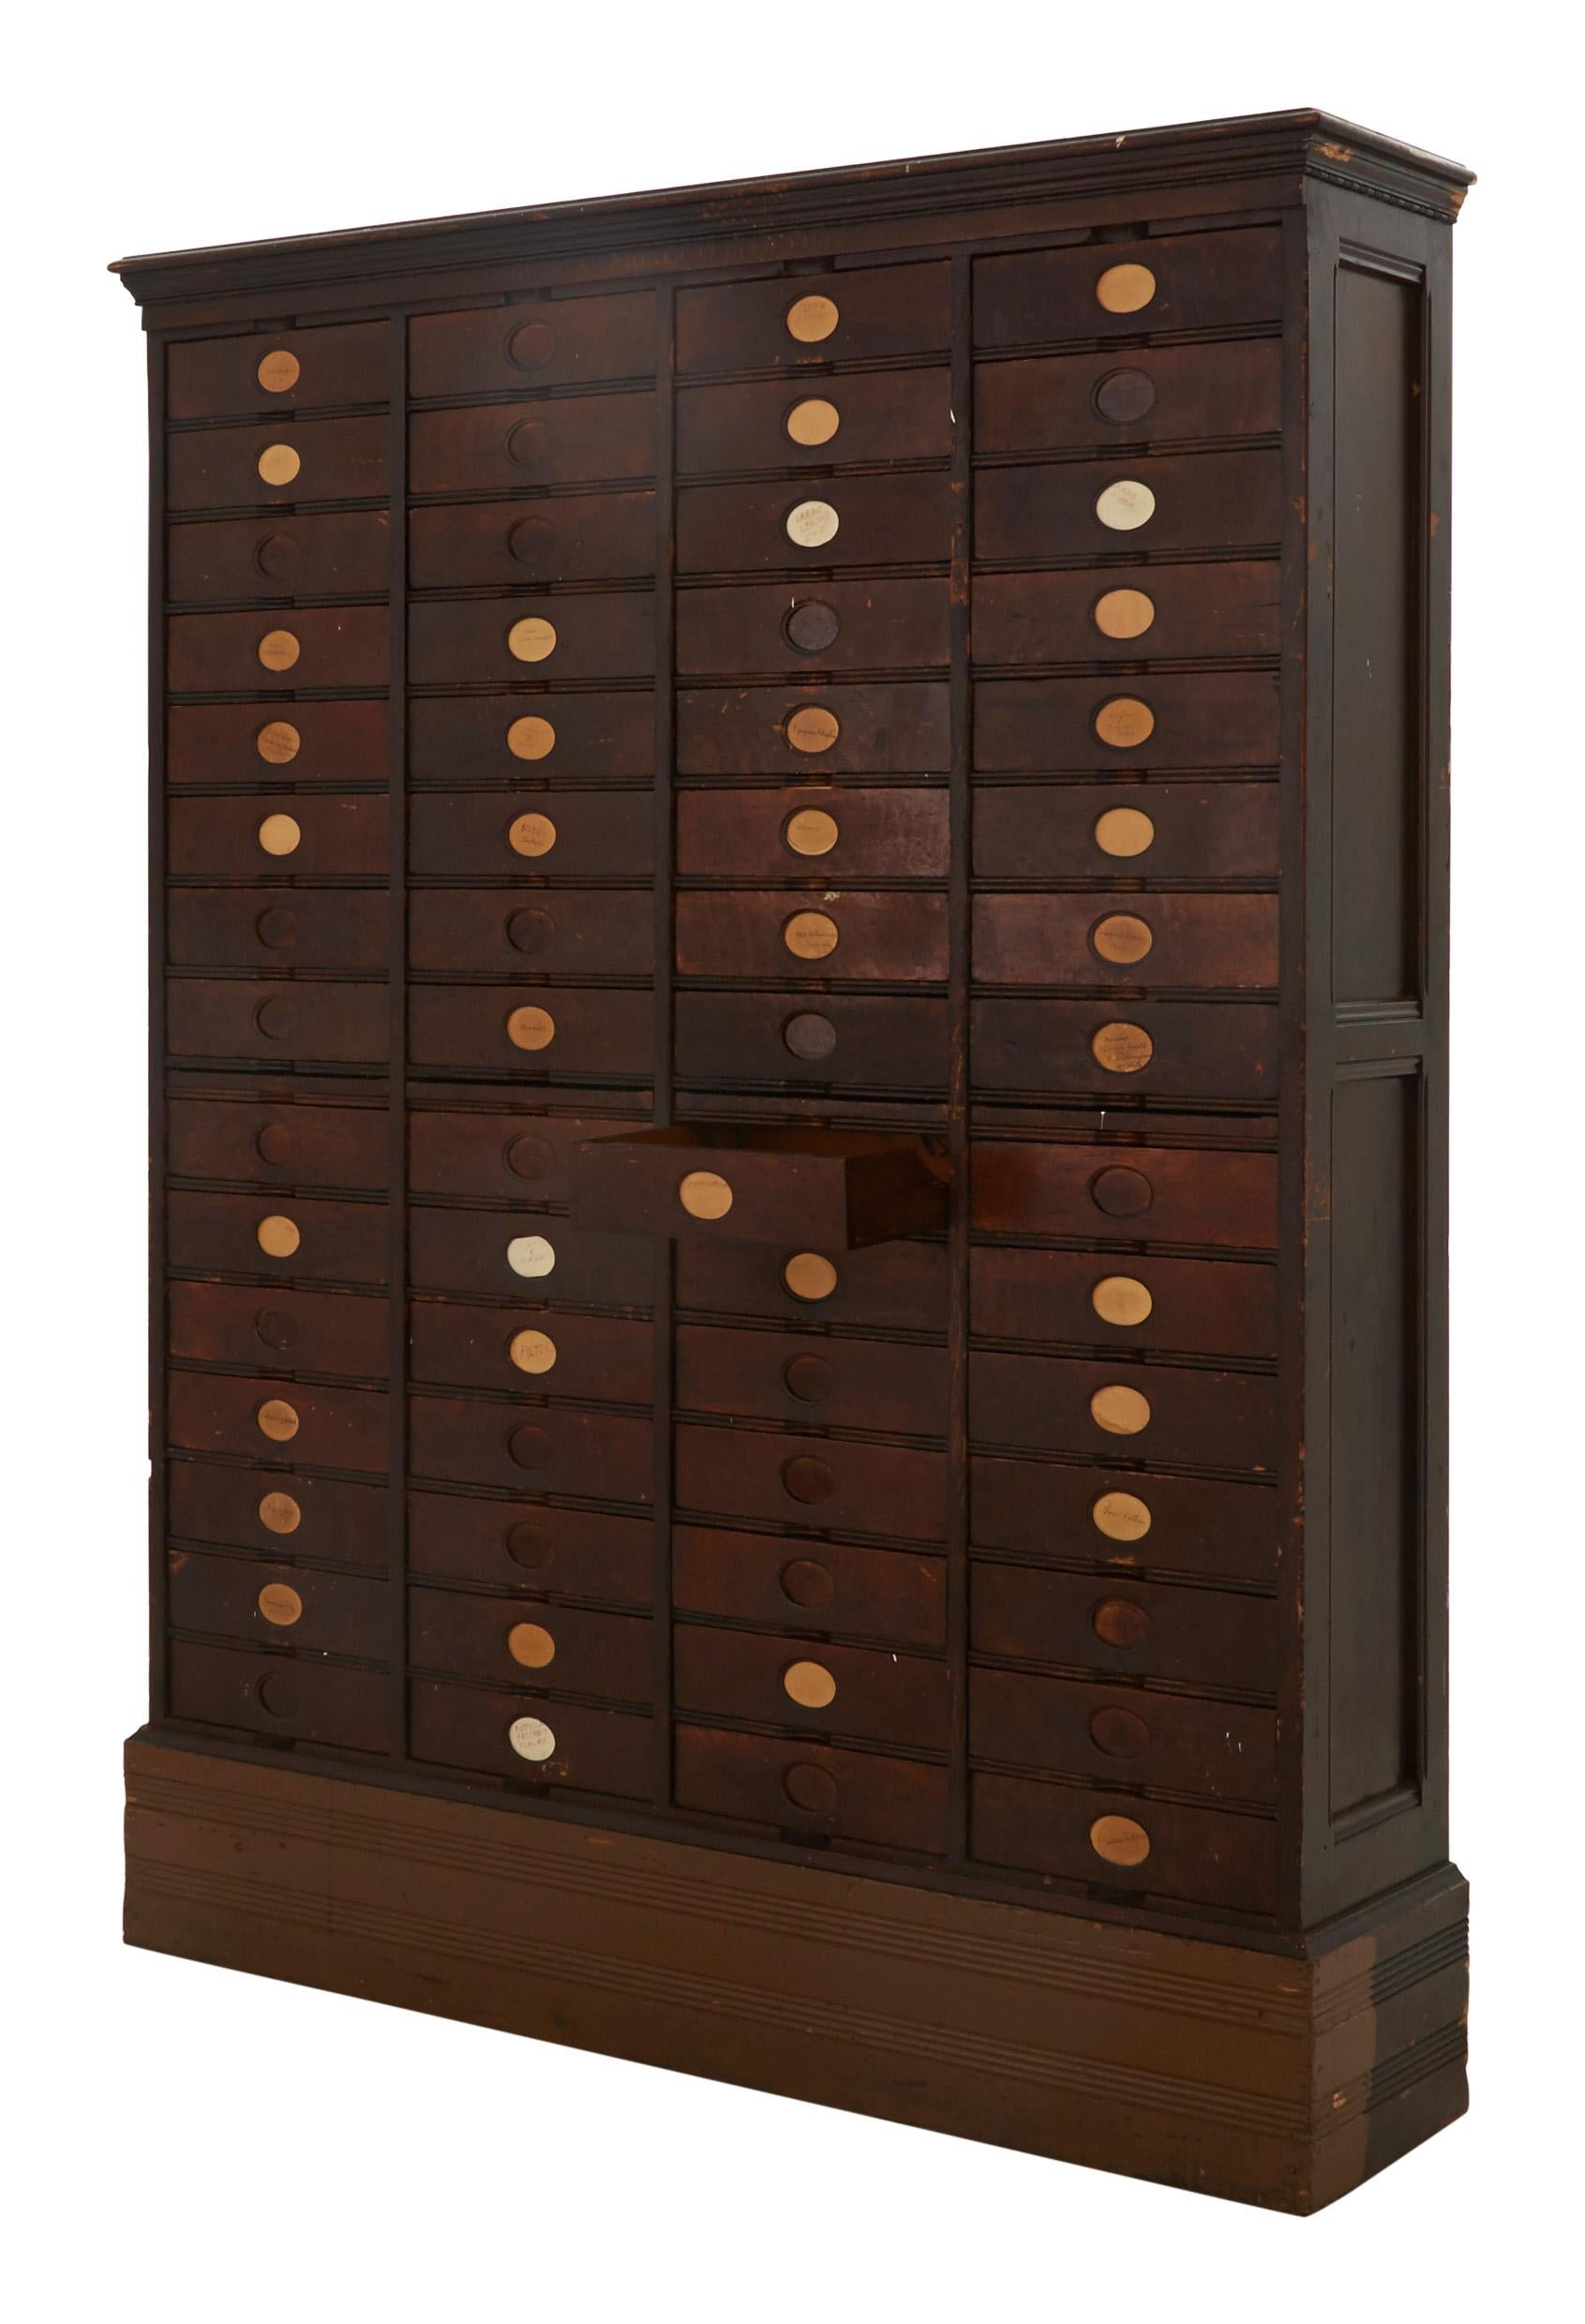 19th Century Amberg Imperial Letter Filing Cabinet For Sale